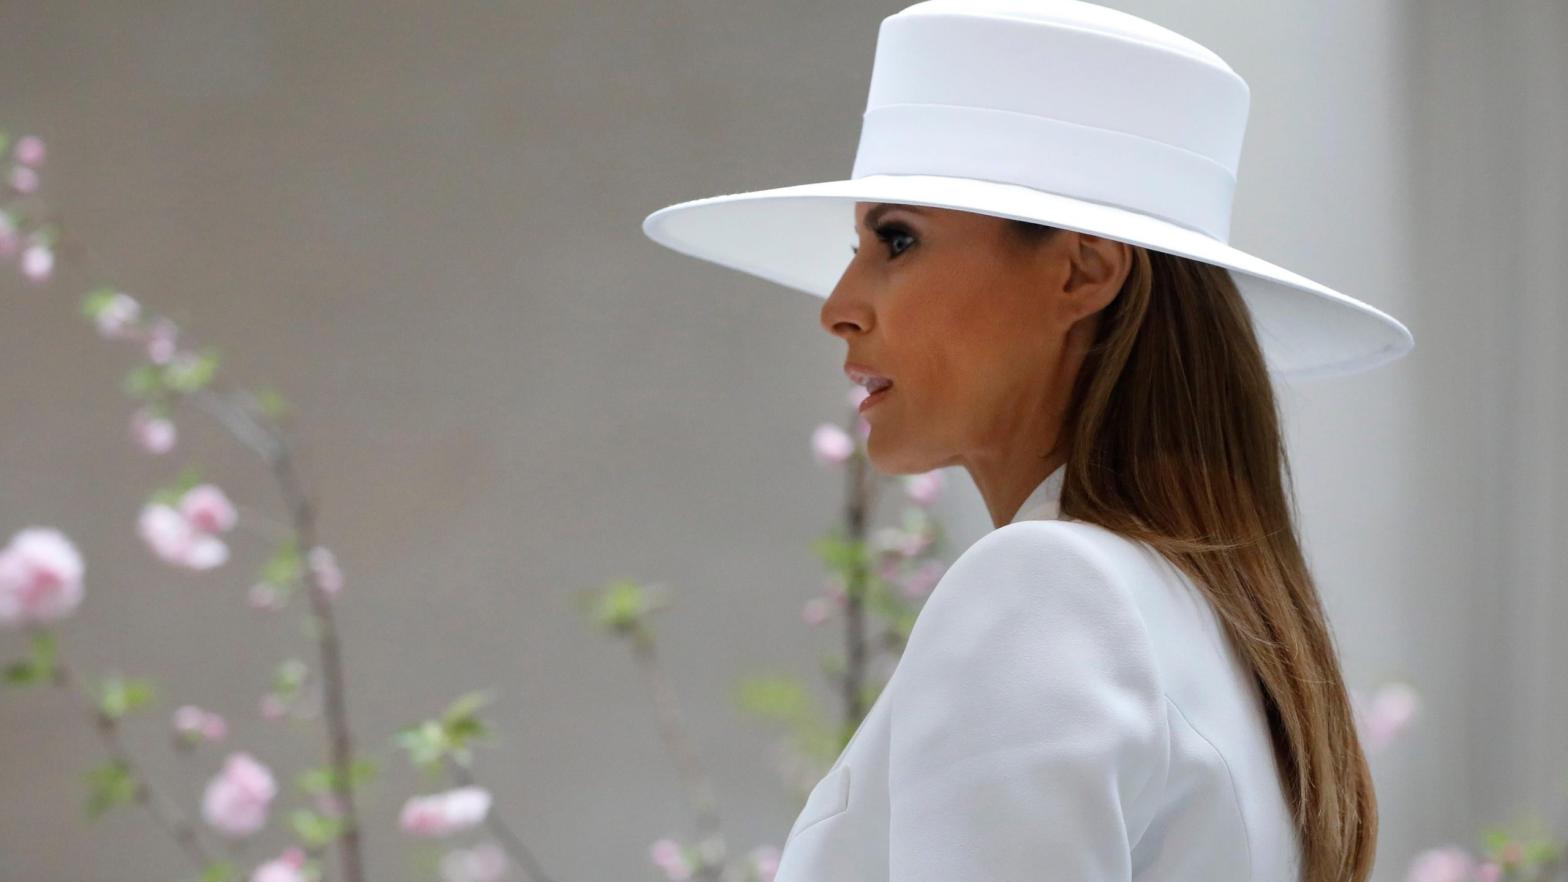 WASHINGTON, DC - April 24: First Lady Melania Trump tours the National Gallery of Art on April 24, 2018 in Washington, DC. President Donald Trump is hosting French President Emmanuel Macron for the first state visit of his presidency. (Photo: Aaron P. Bernstein, Getty Images)